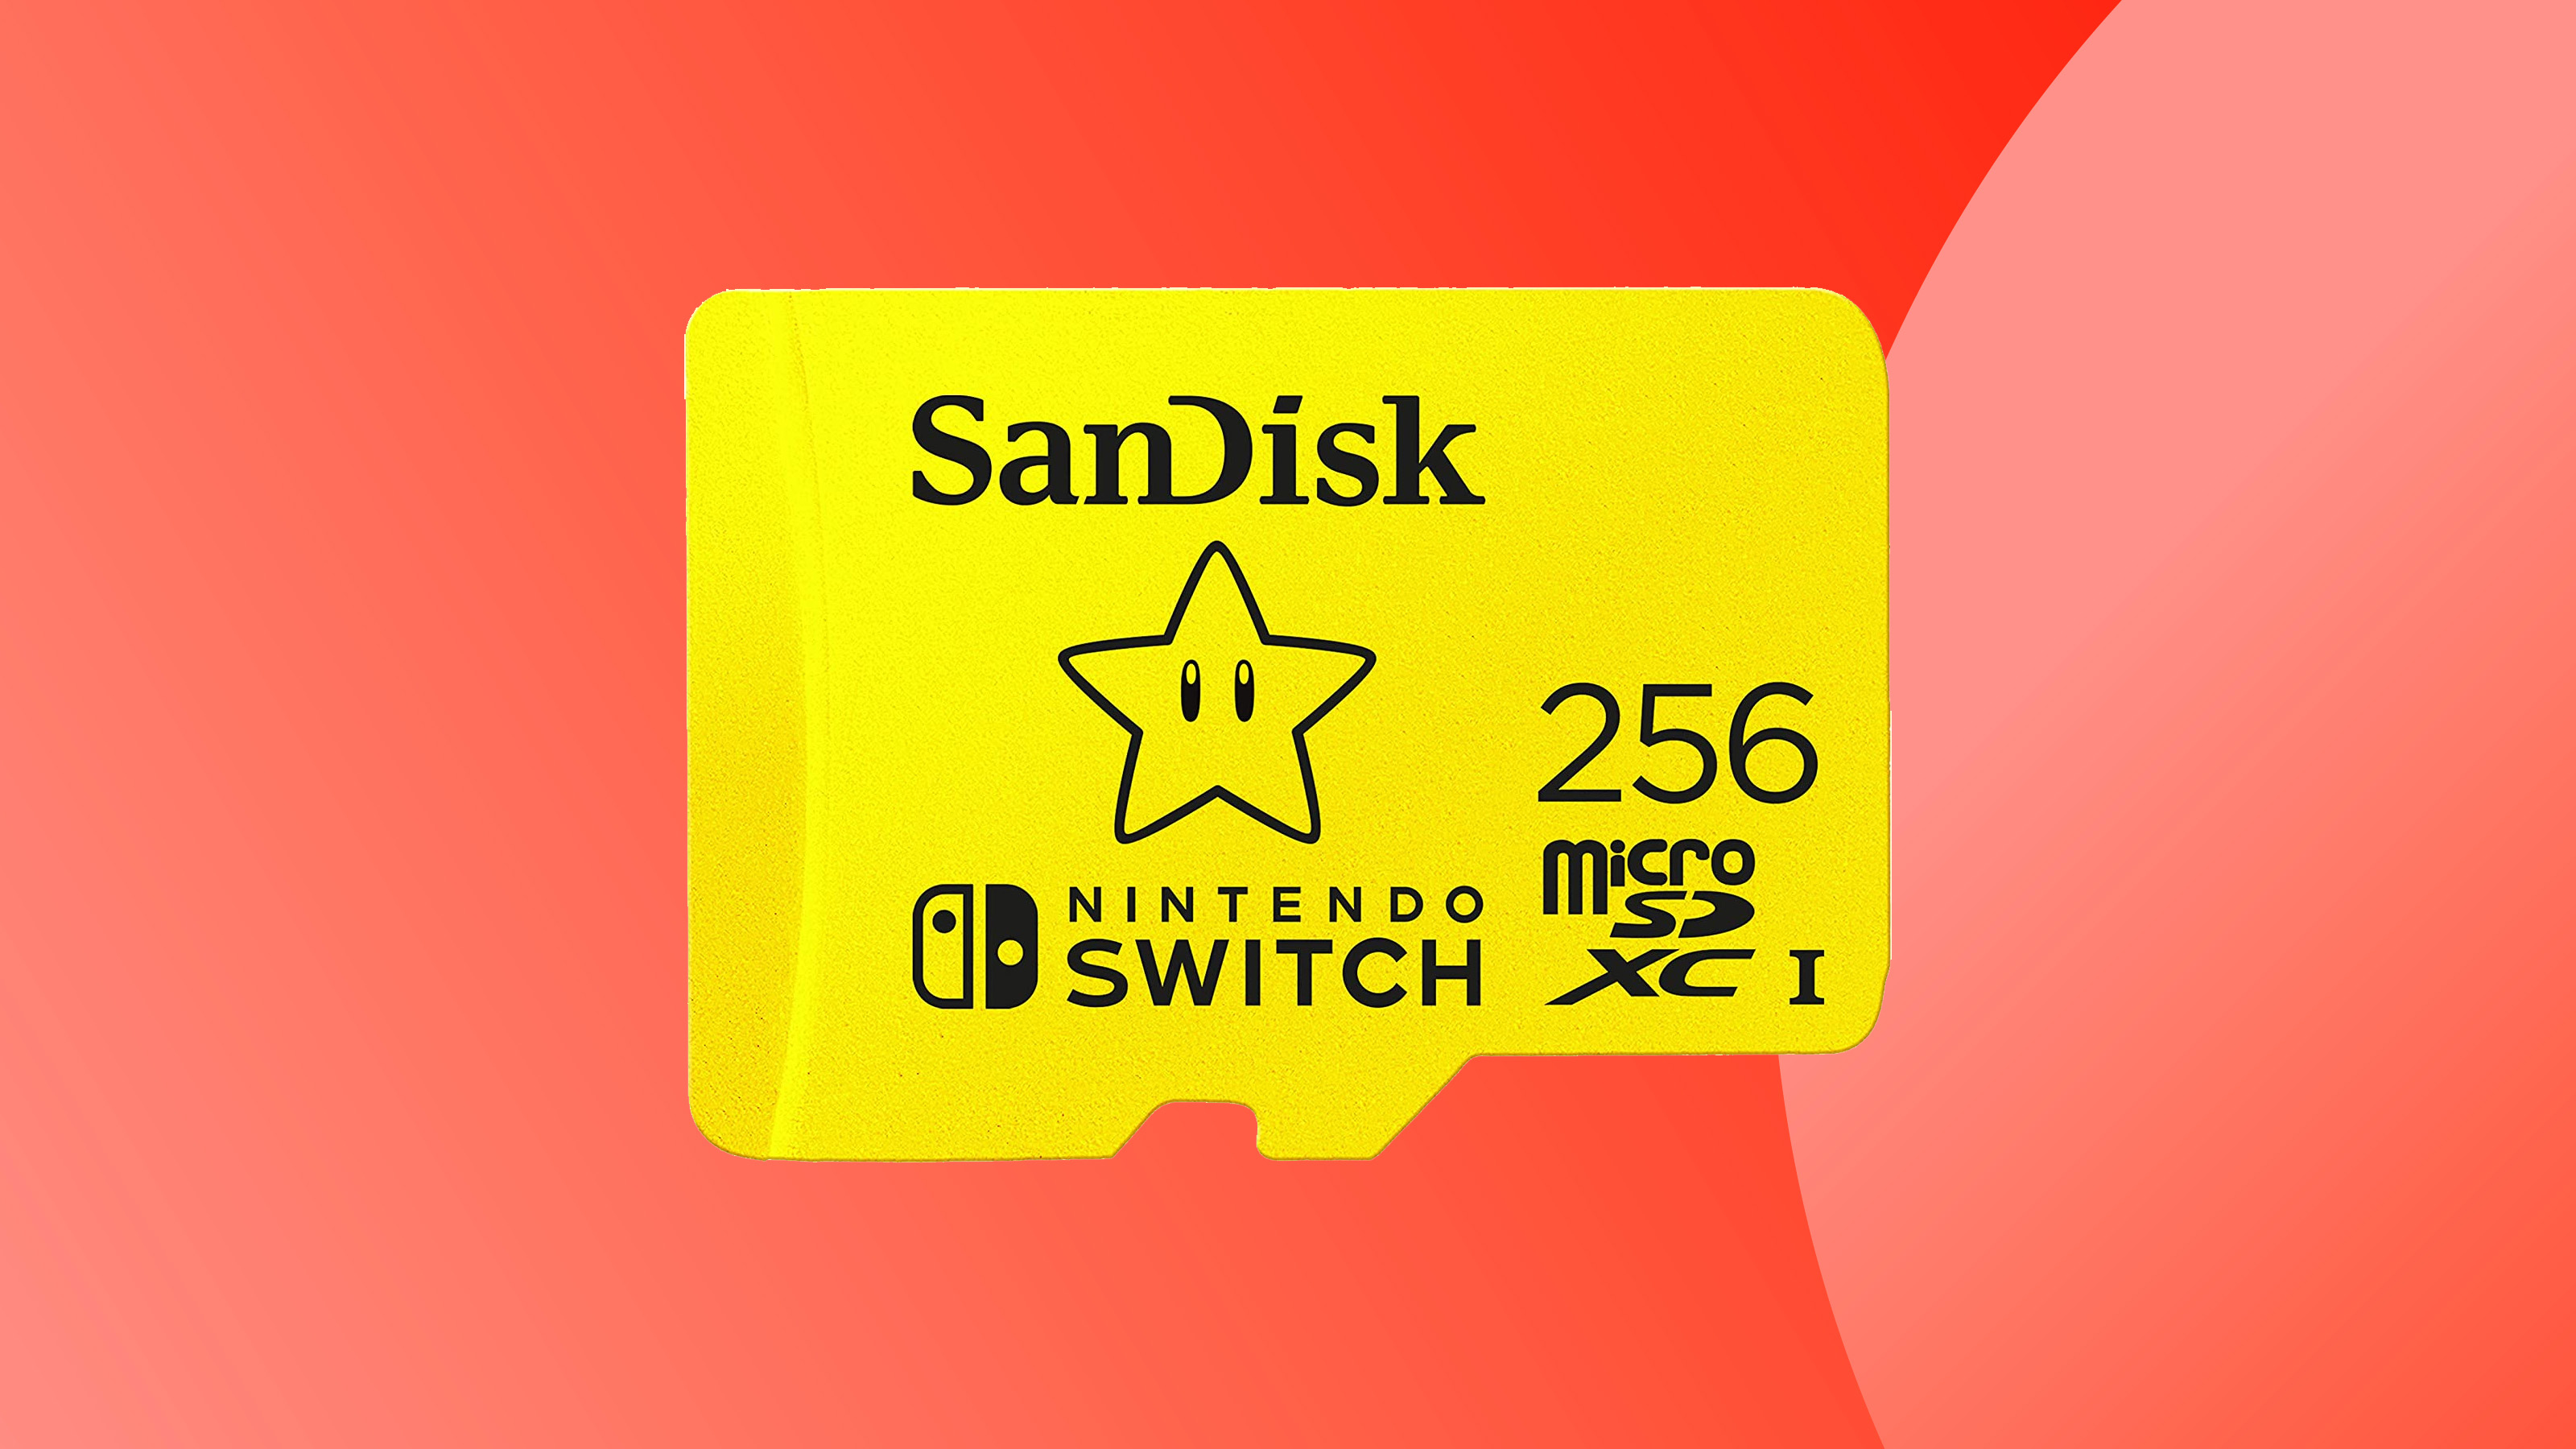 Product shot of a SanDisk Micro SD card on a colorful background